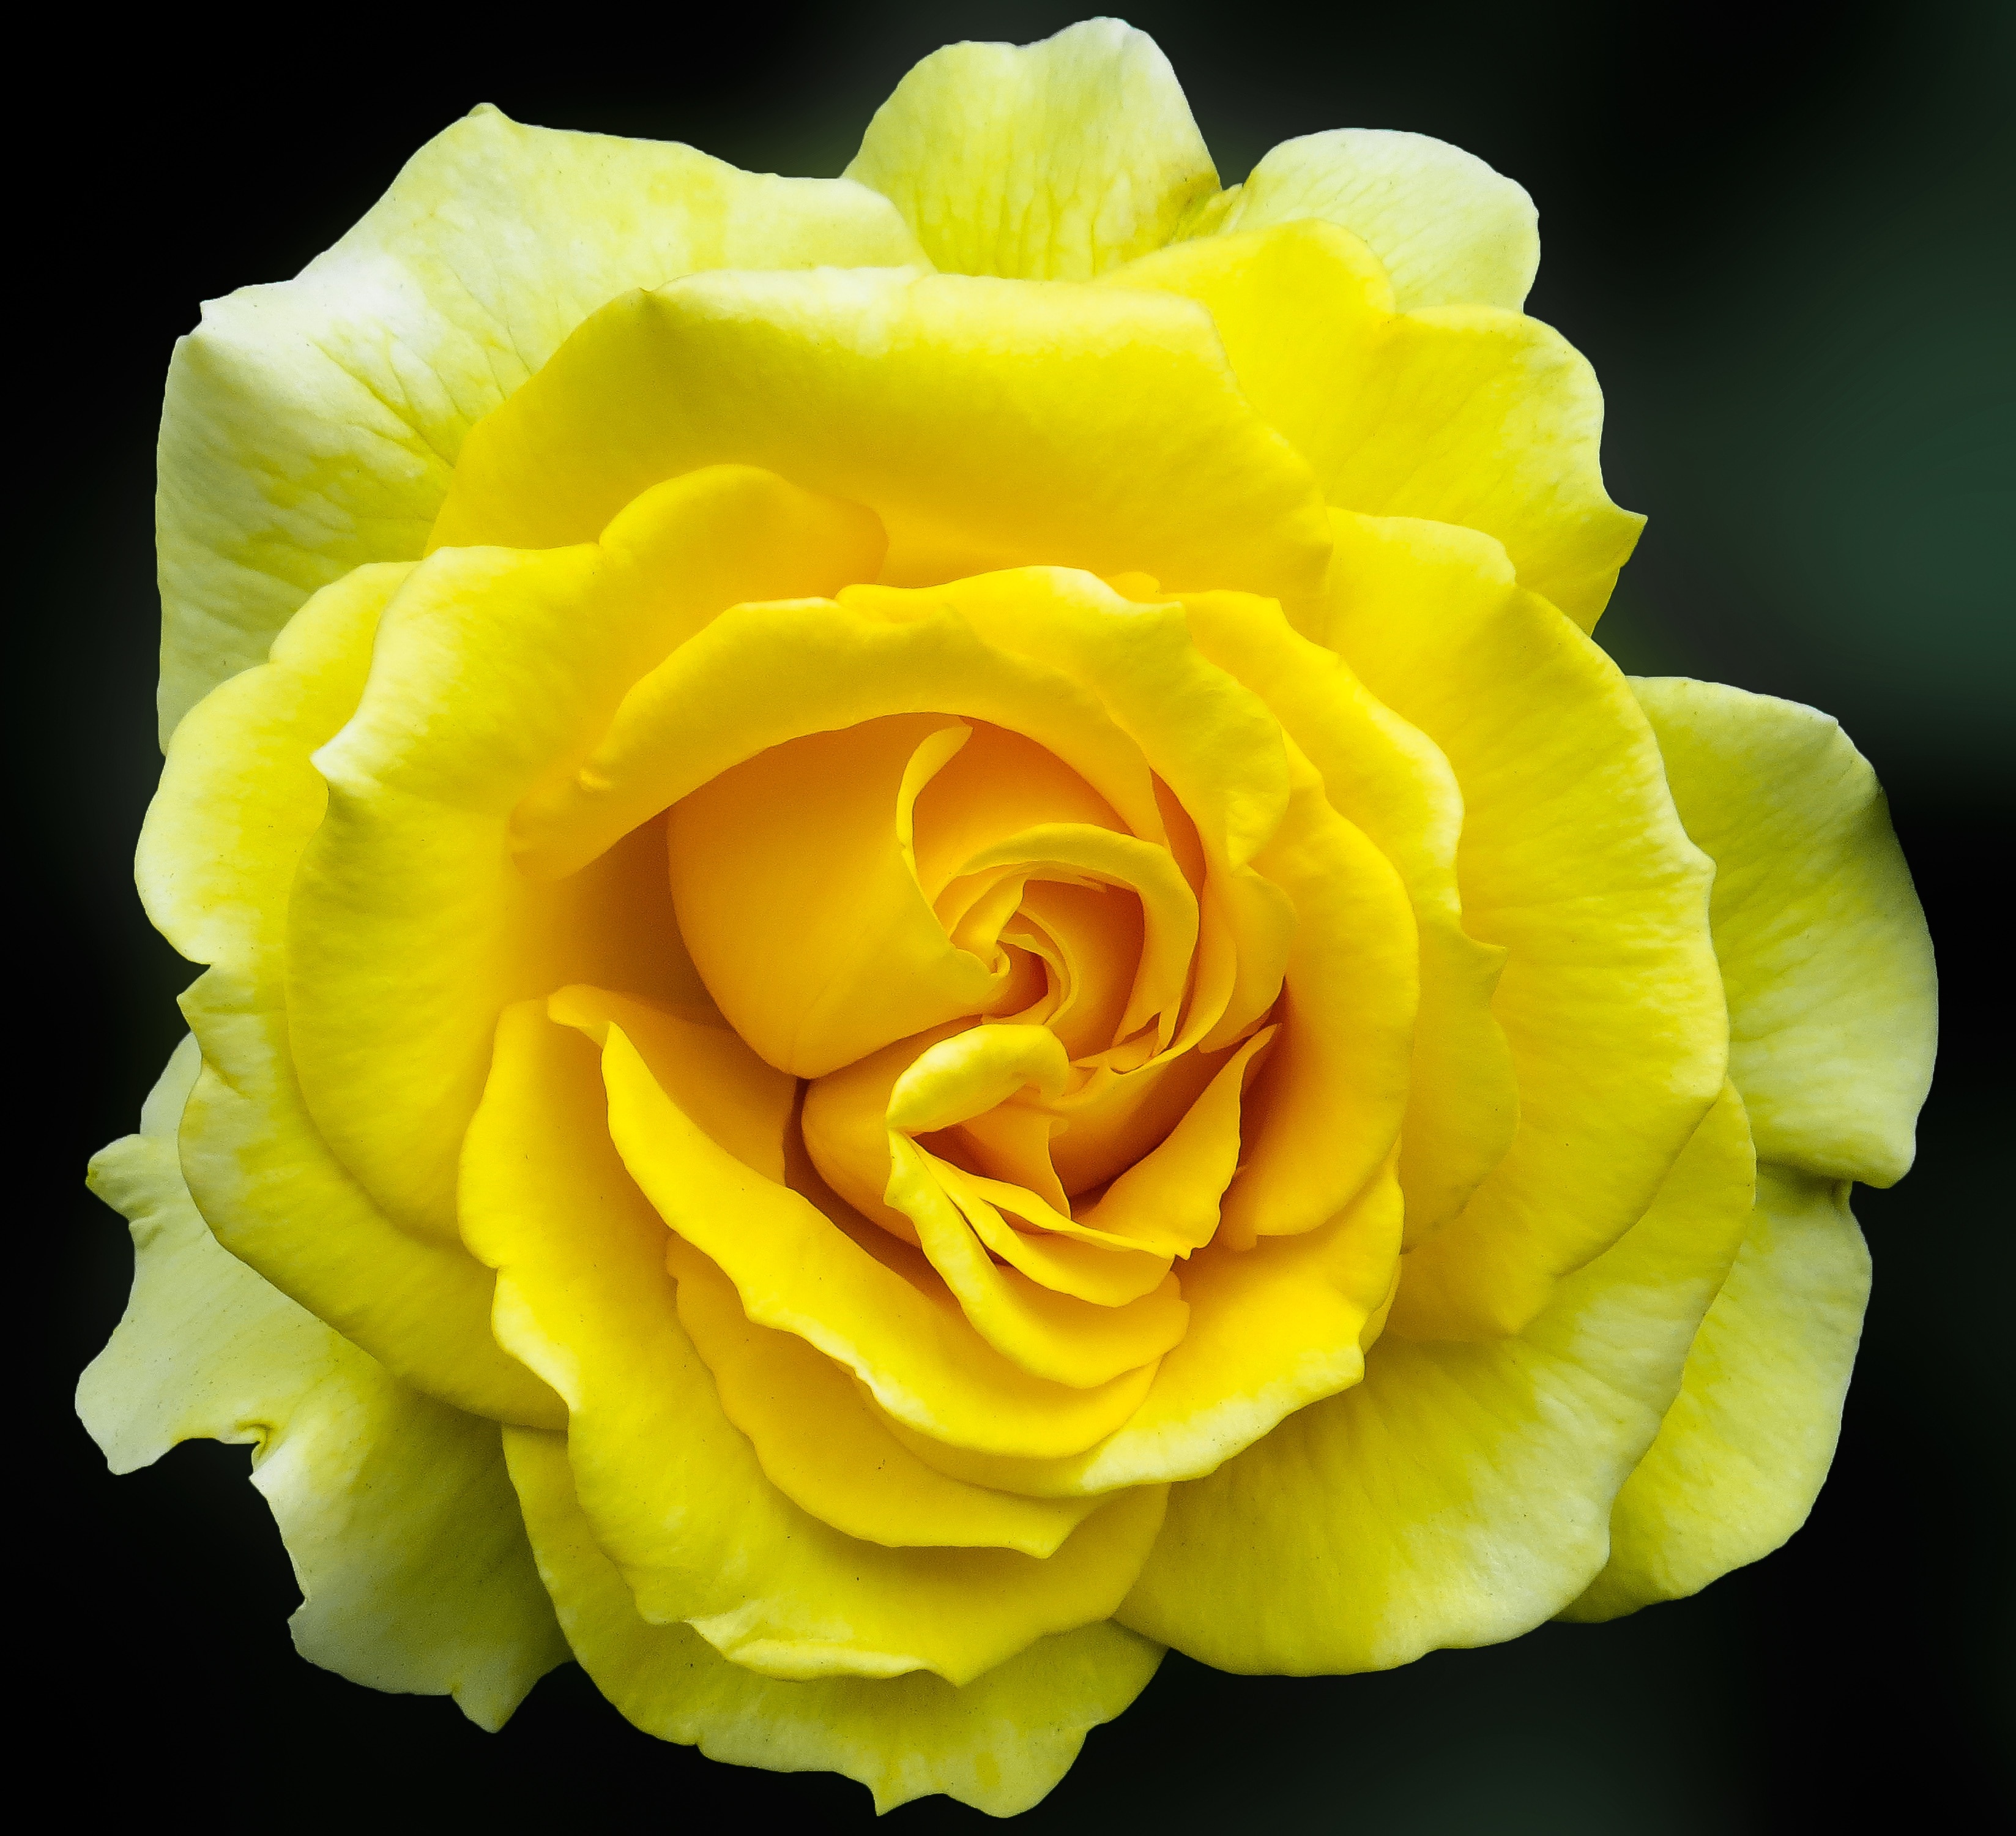 close-up photo of yellow rose in bloom